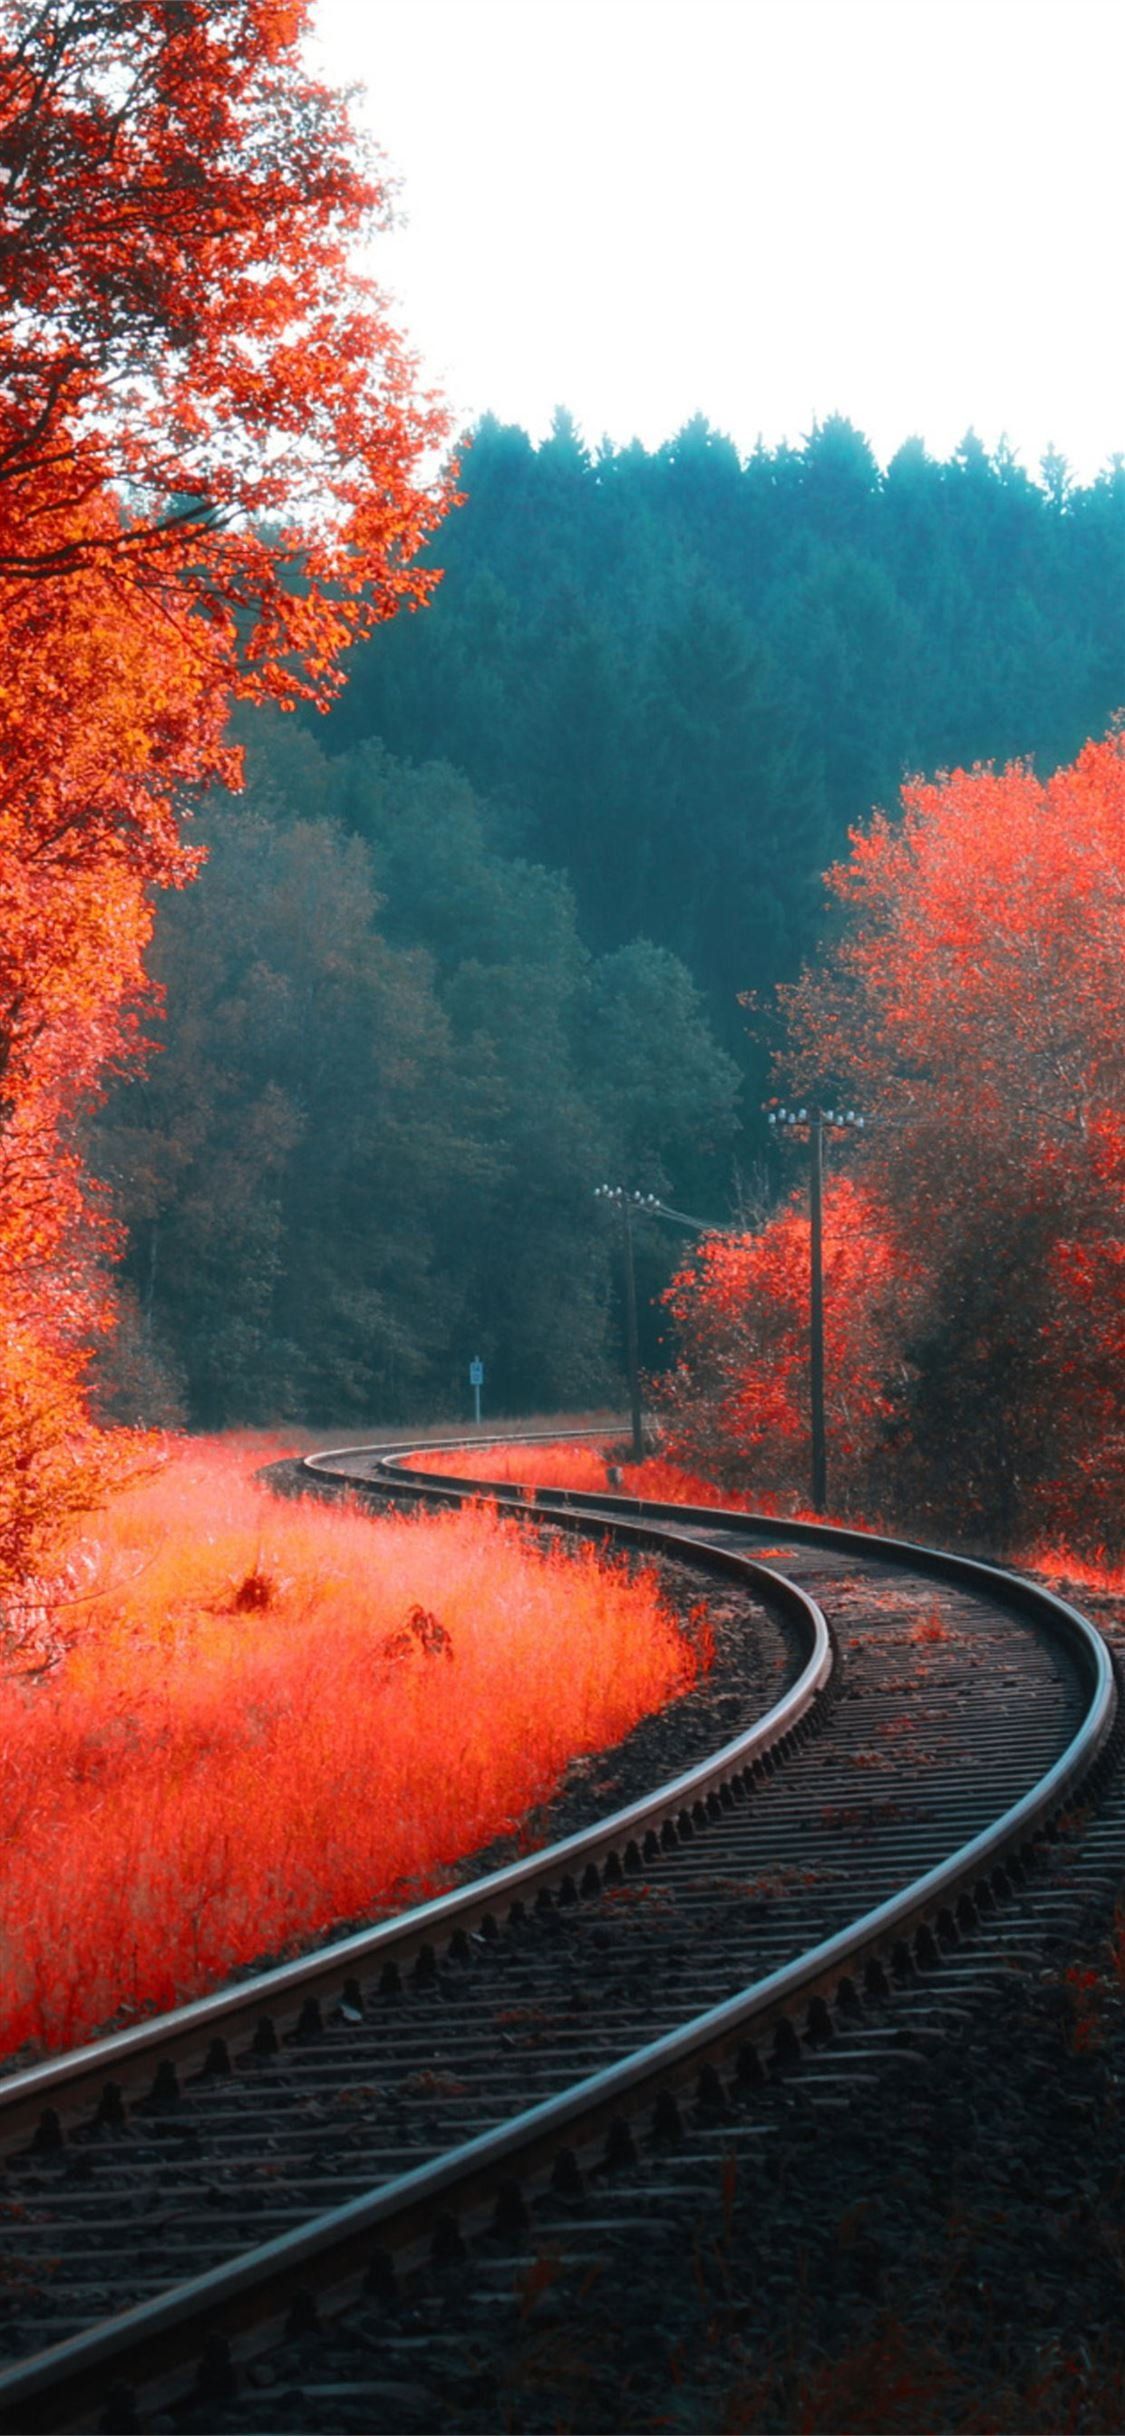 A railway track in the middle of a forest with red and orange trees - Forest